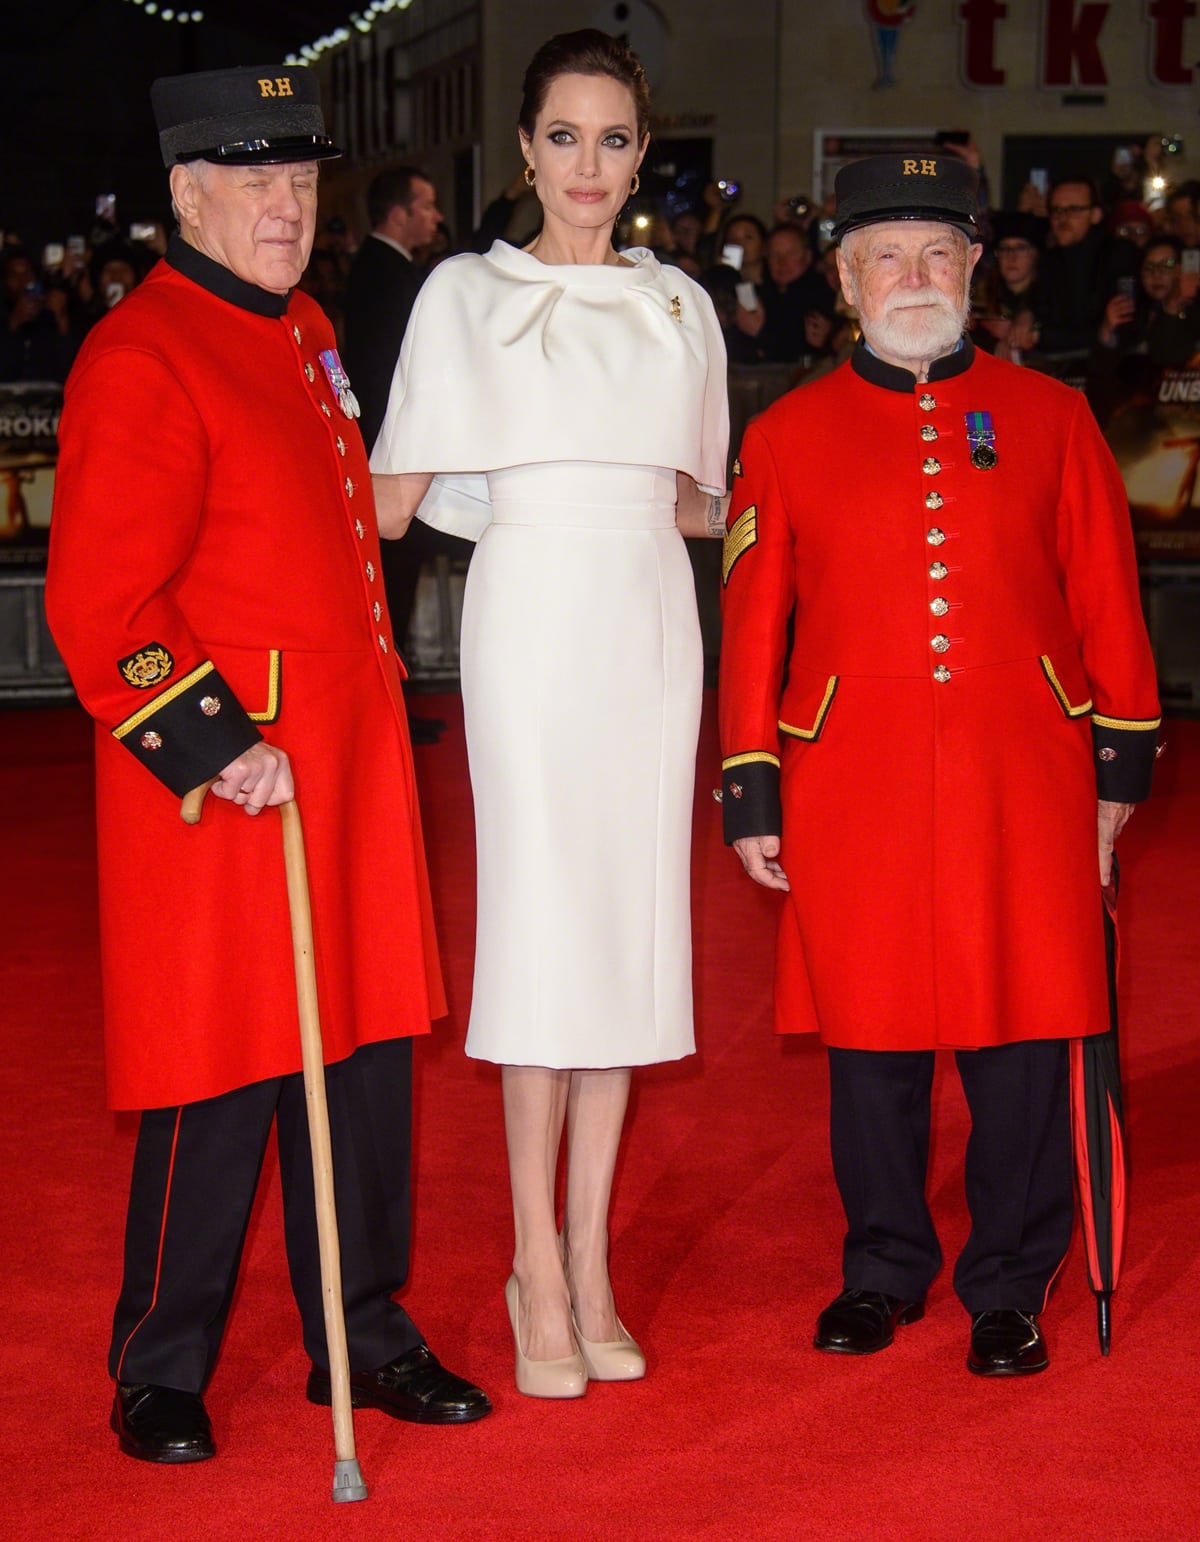 Angelina Jolie graced the premiere of ‘Unbroken’ at London's iconic Odeon Leicester Square in a creation by her go-to British couturier, Ralph & Russo